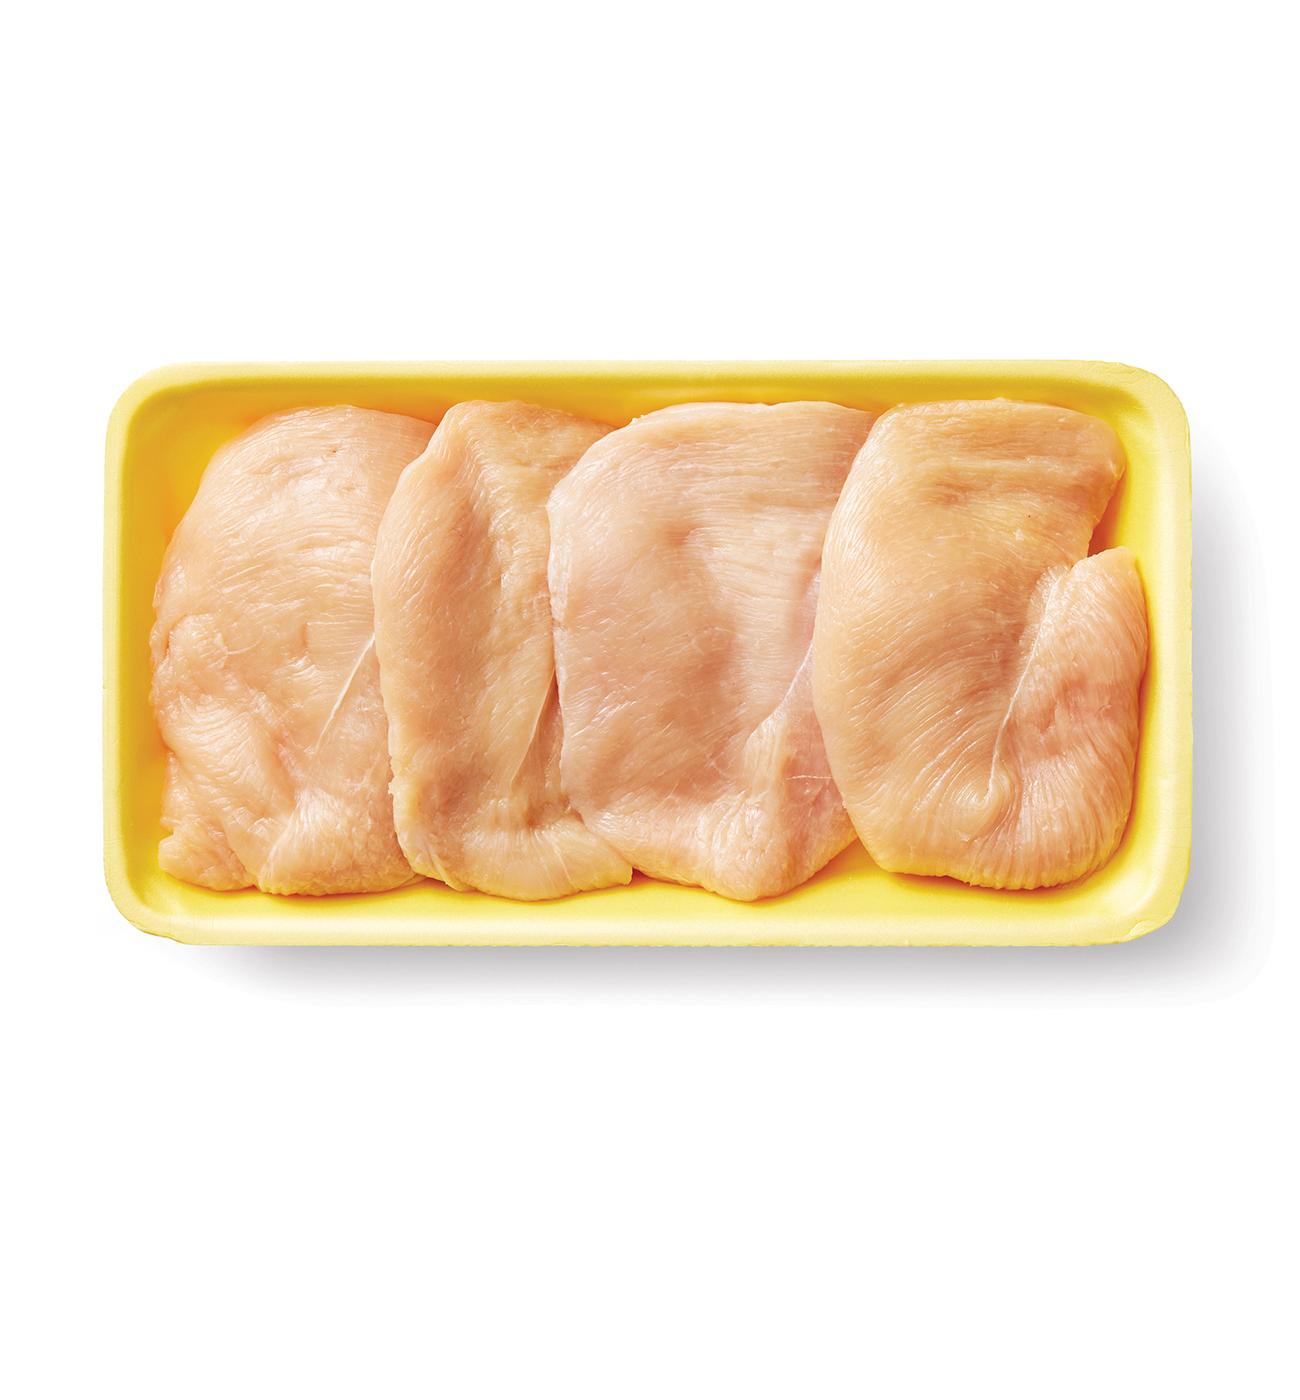 Hill Country Fare Boneless Skinless Split Chicken Breast; image 2 of 4